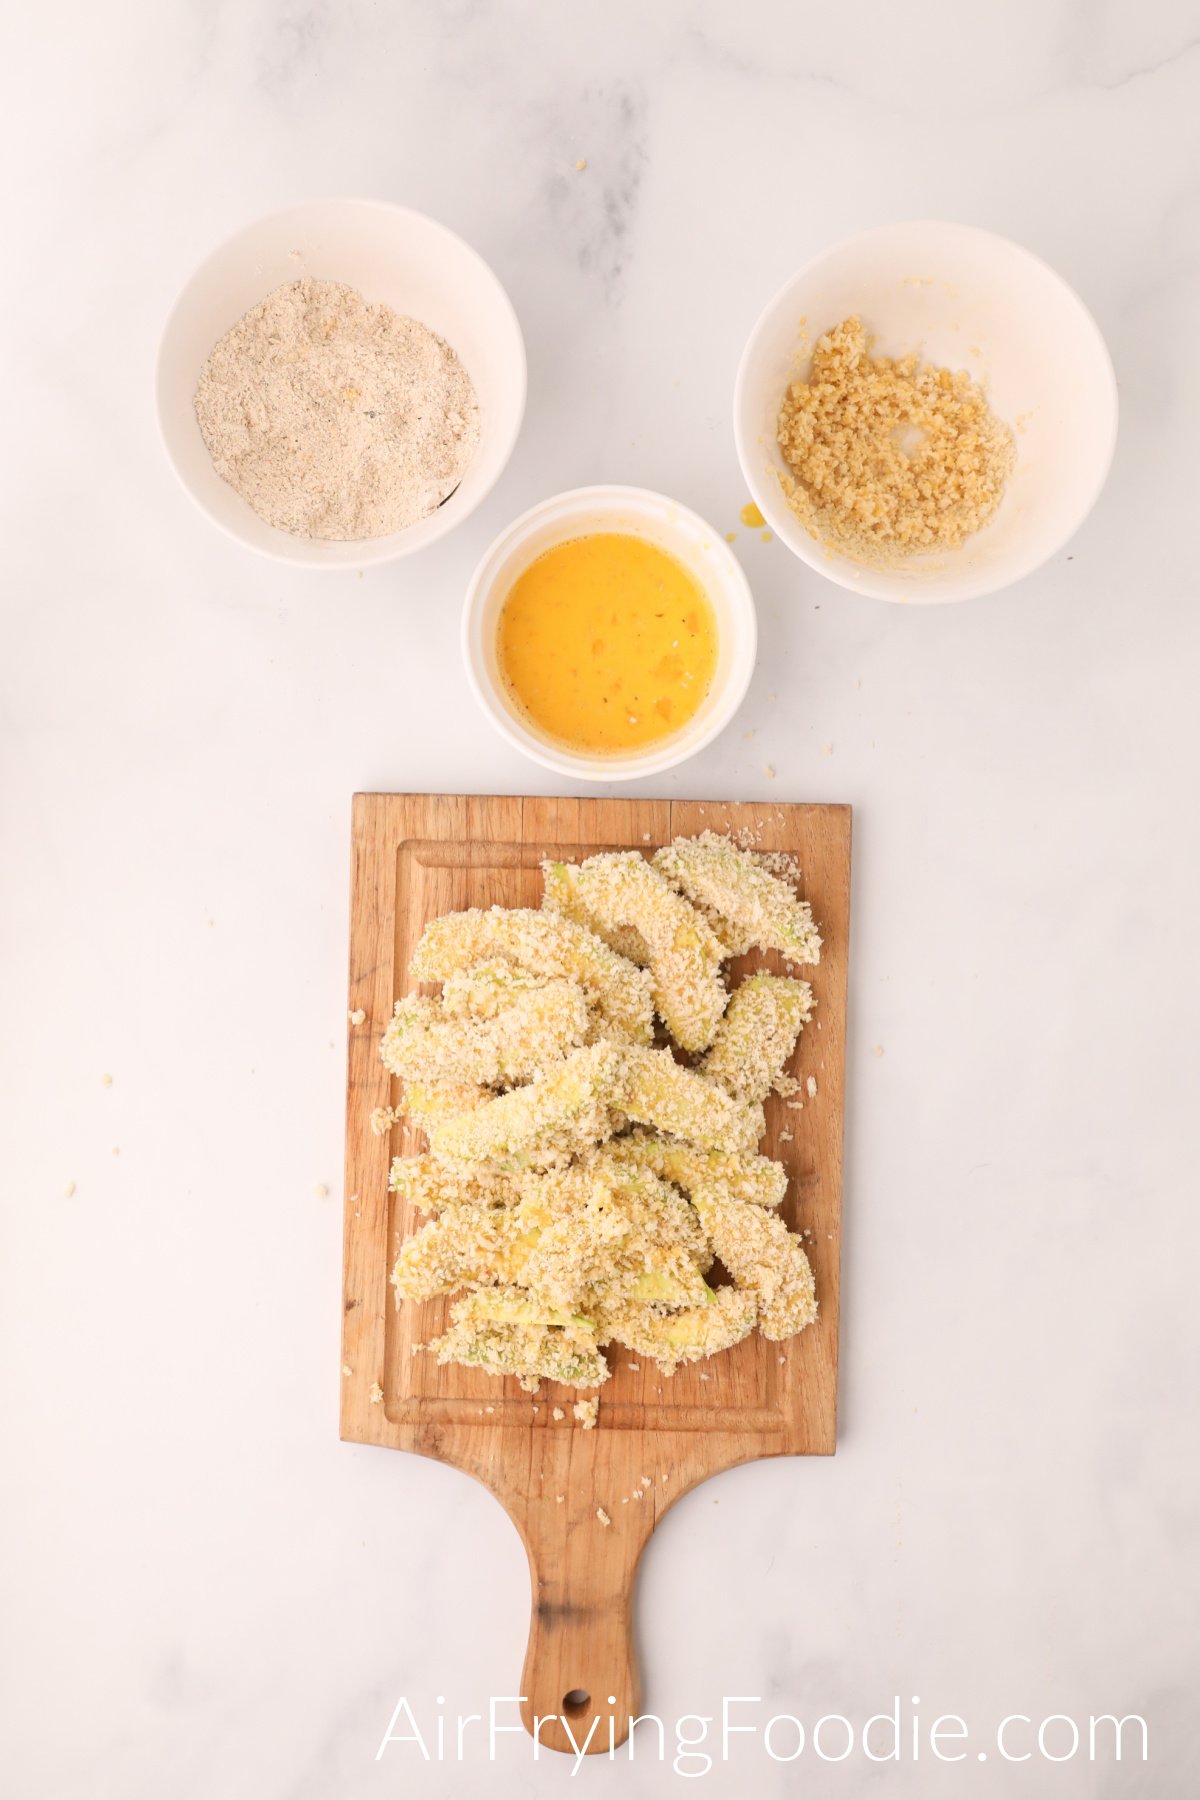 Avocado fries dipped into breadcrumb and egg mixtures before cooking.